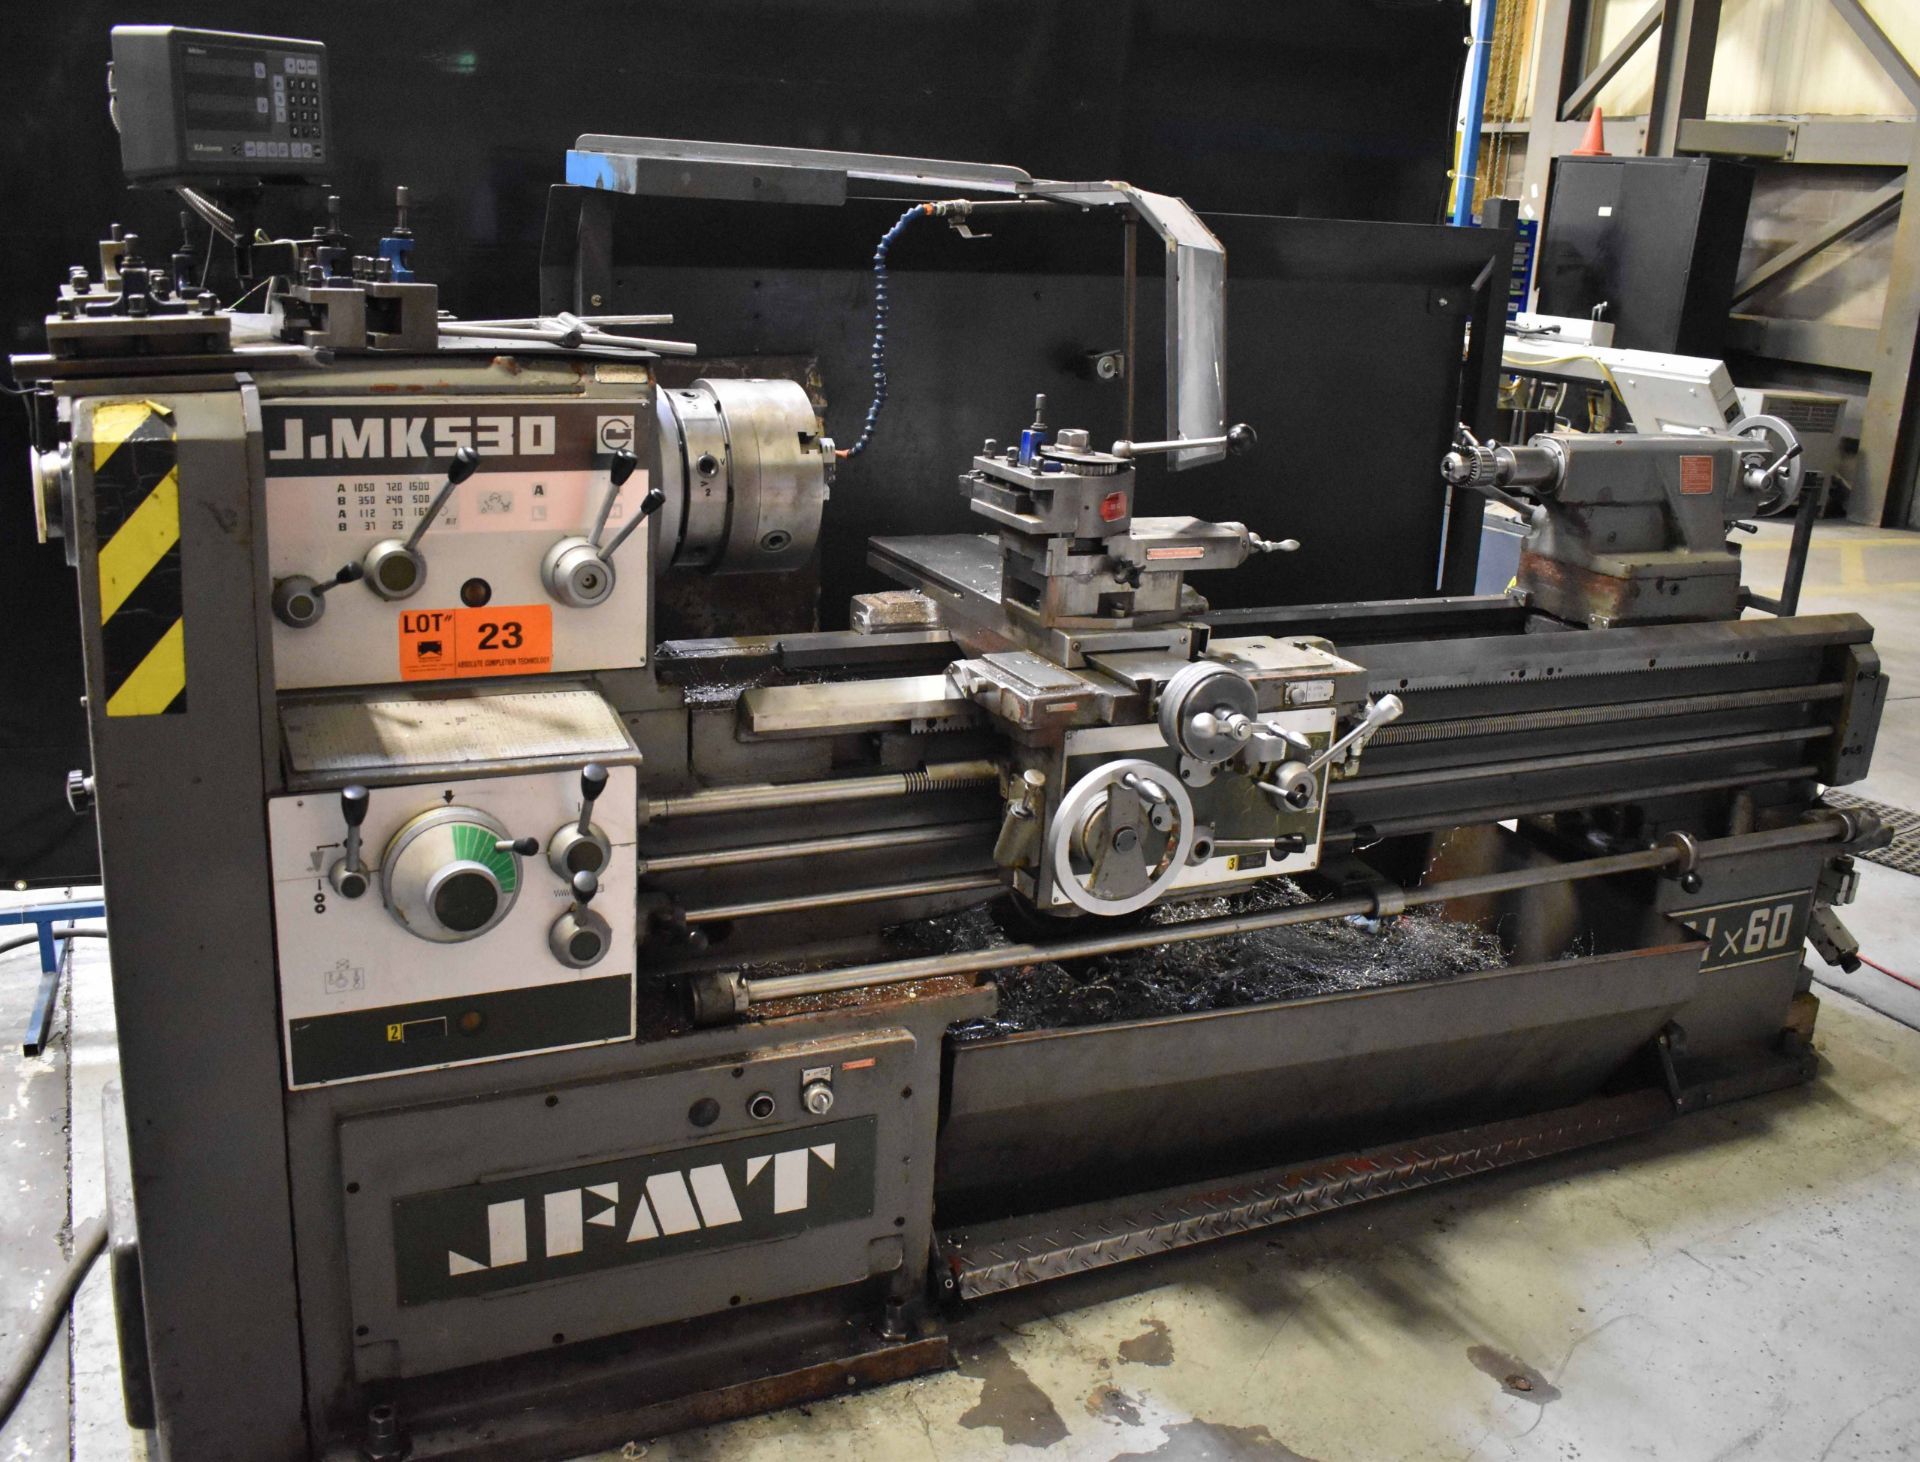 JFMT JIMK530 GAP BED ENGINE LATHE WITH 21" SWING OVER BED, 60" BETWEEN CENTERS, SPEEDS TO 1500